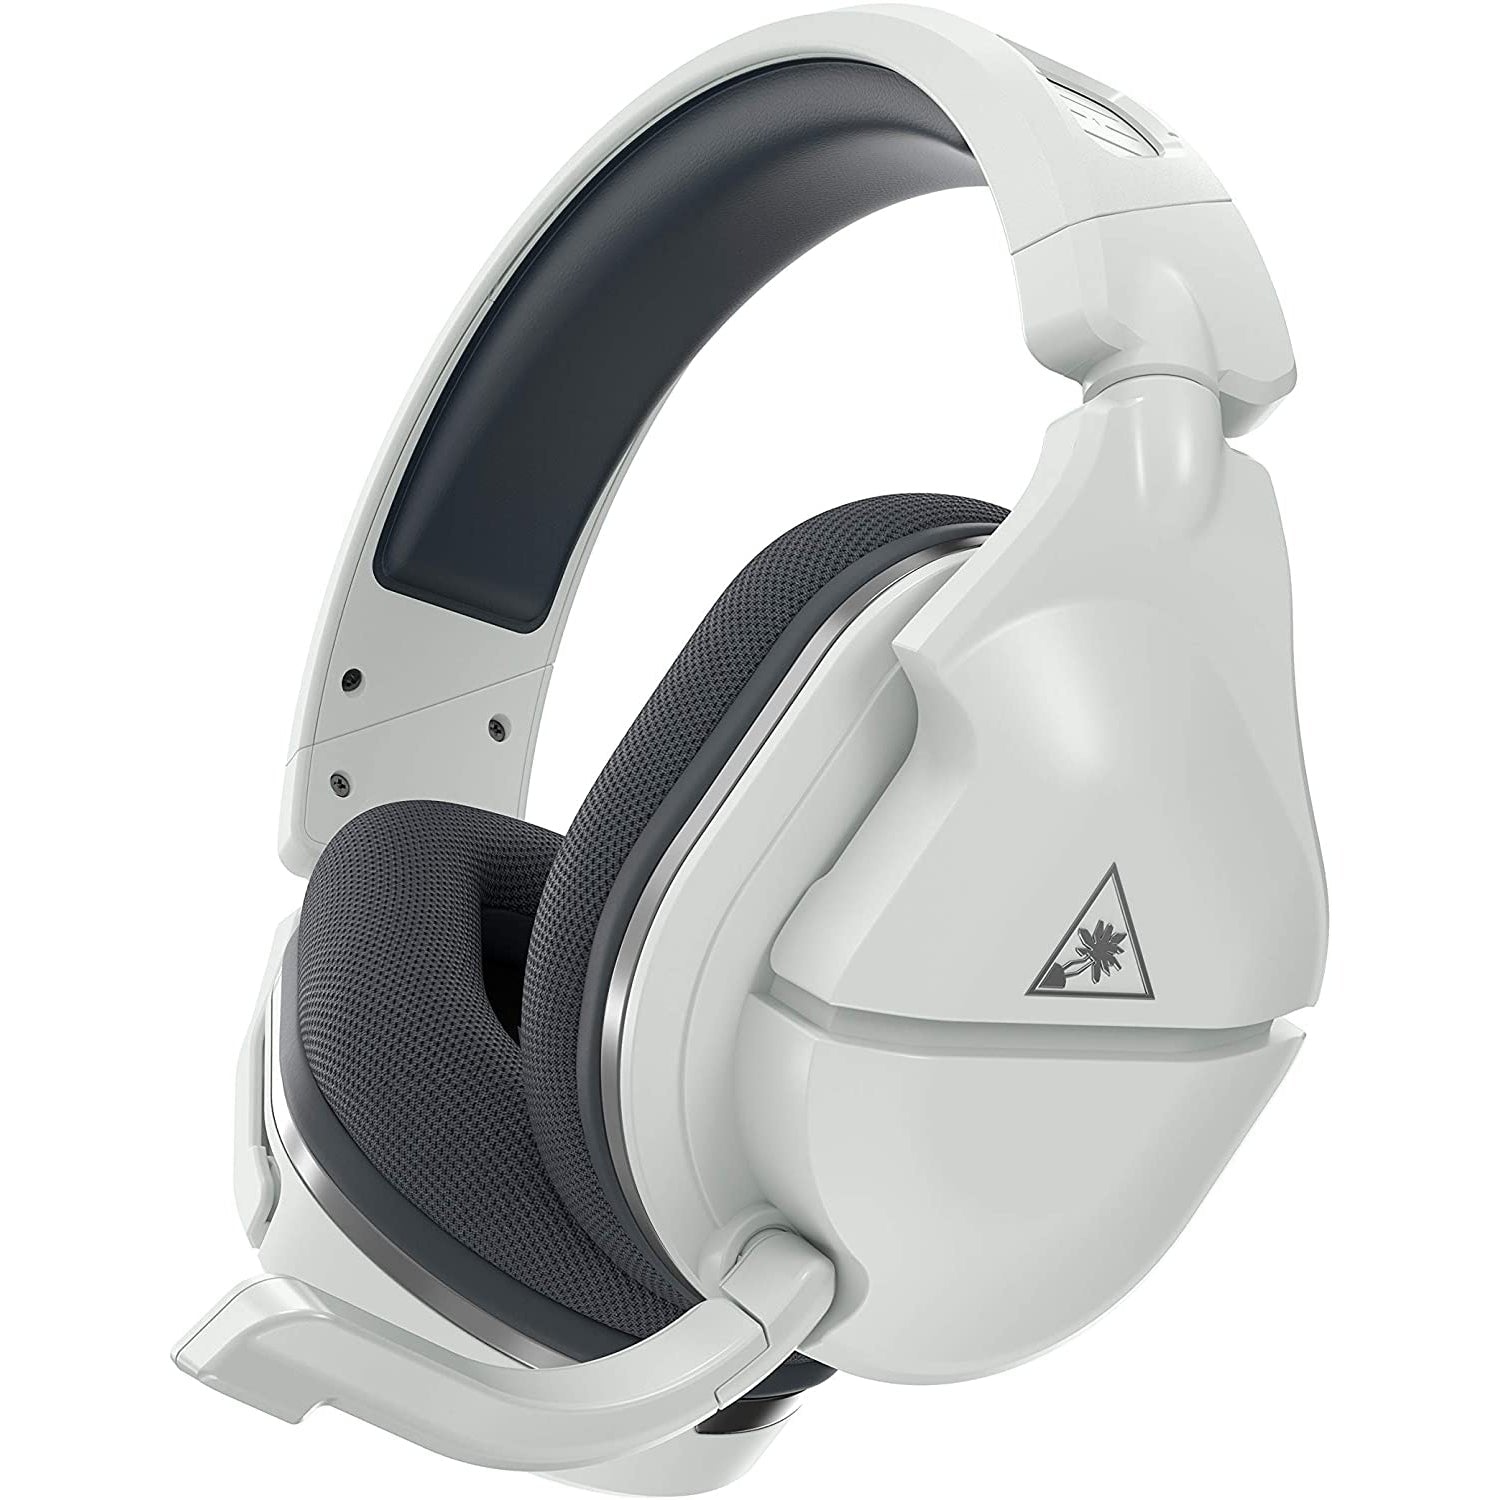 Turtle Beach Stealth 600 Gen 2 Gaming Headset for PlayStation, White - Refurbished Excellent